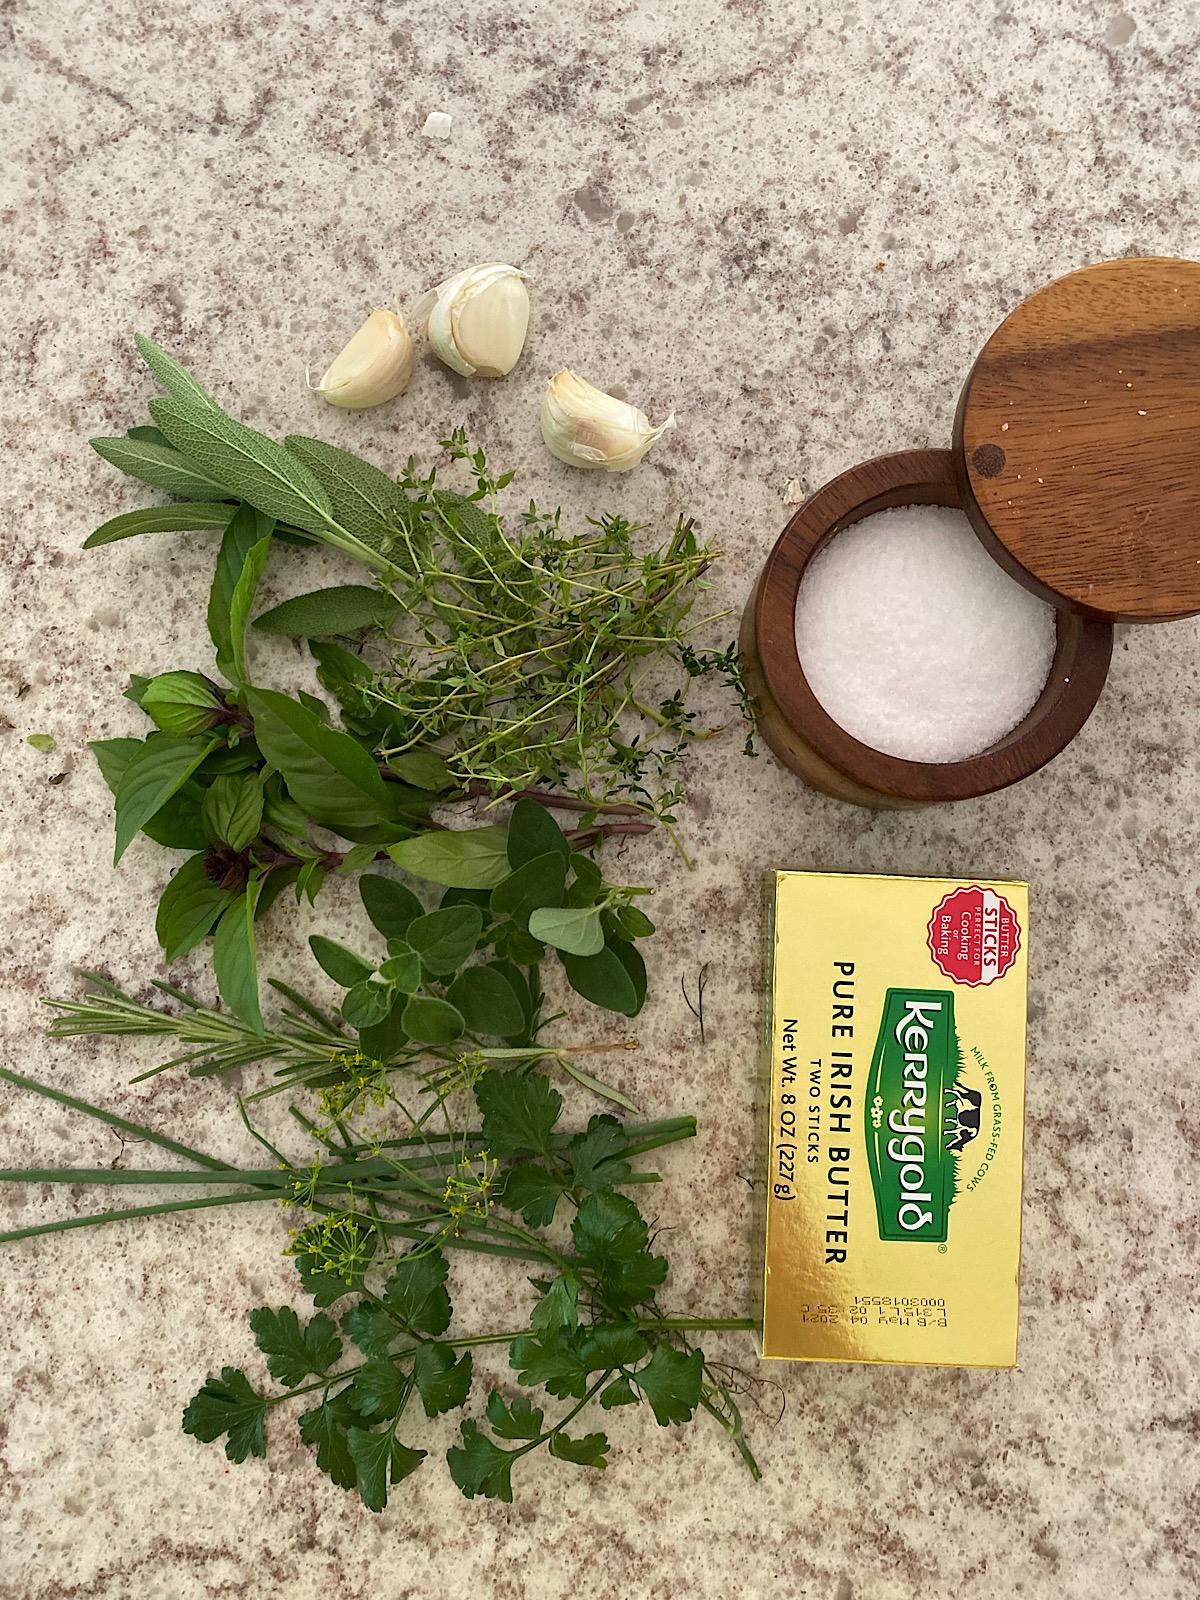 Ingredients for making herbal butters